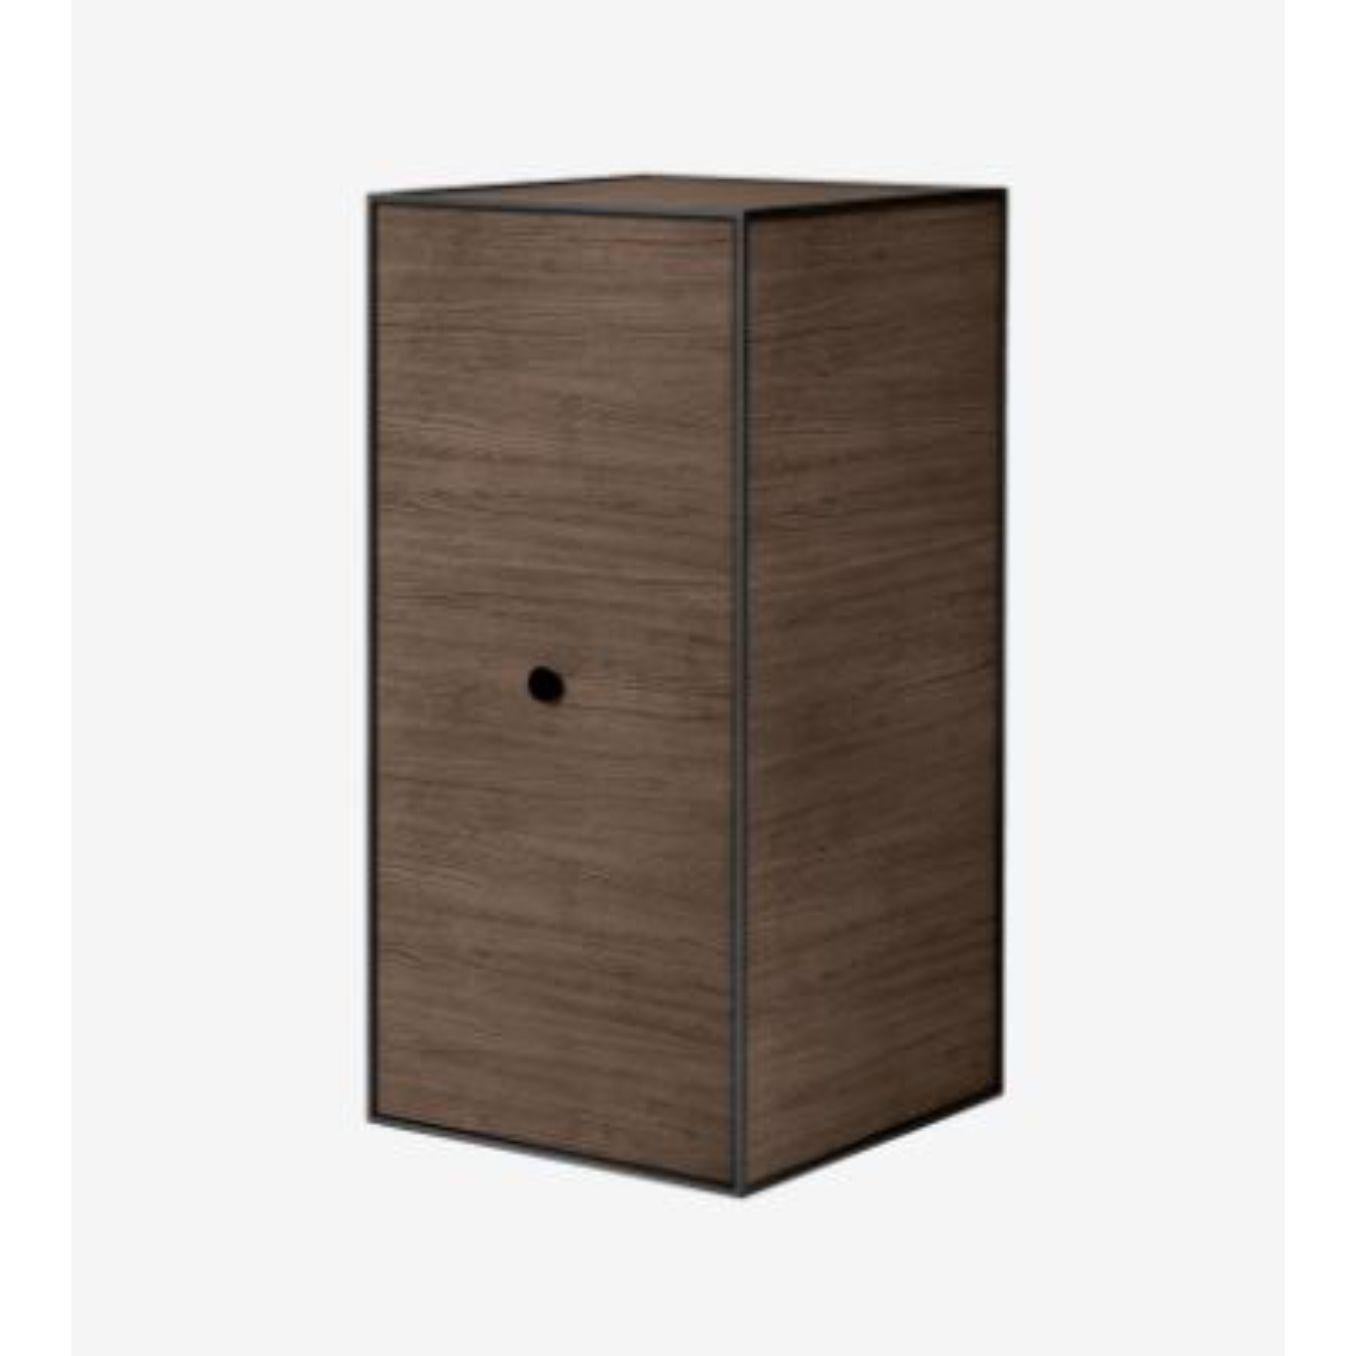 70 smoked oak frame box with 2 shelves / doorby Lassen
Dimensions: D 35 x W 35 x H 70 cm 
Materials: Finér,melamin, melamin, melamine, metal, veneer, oak
Also available in different colours and dimensions. 
Weight: 13 kg


By Lassen is a